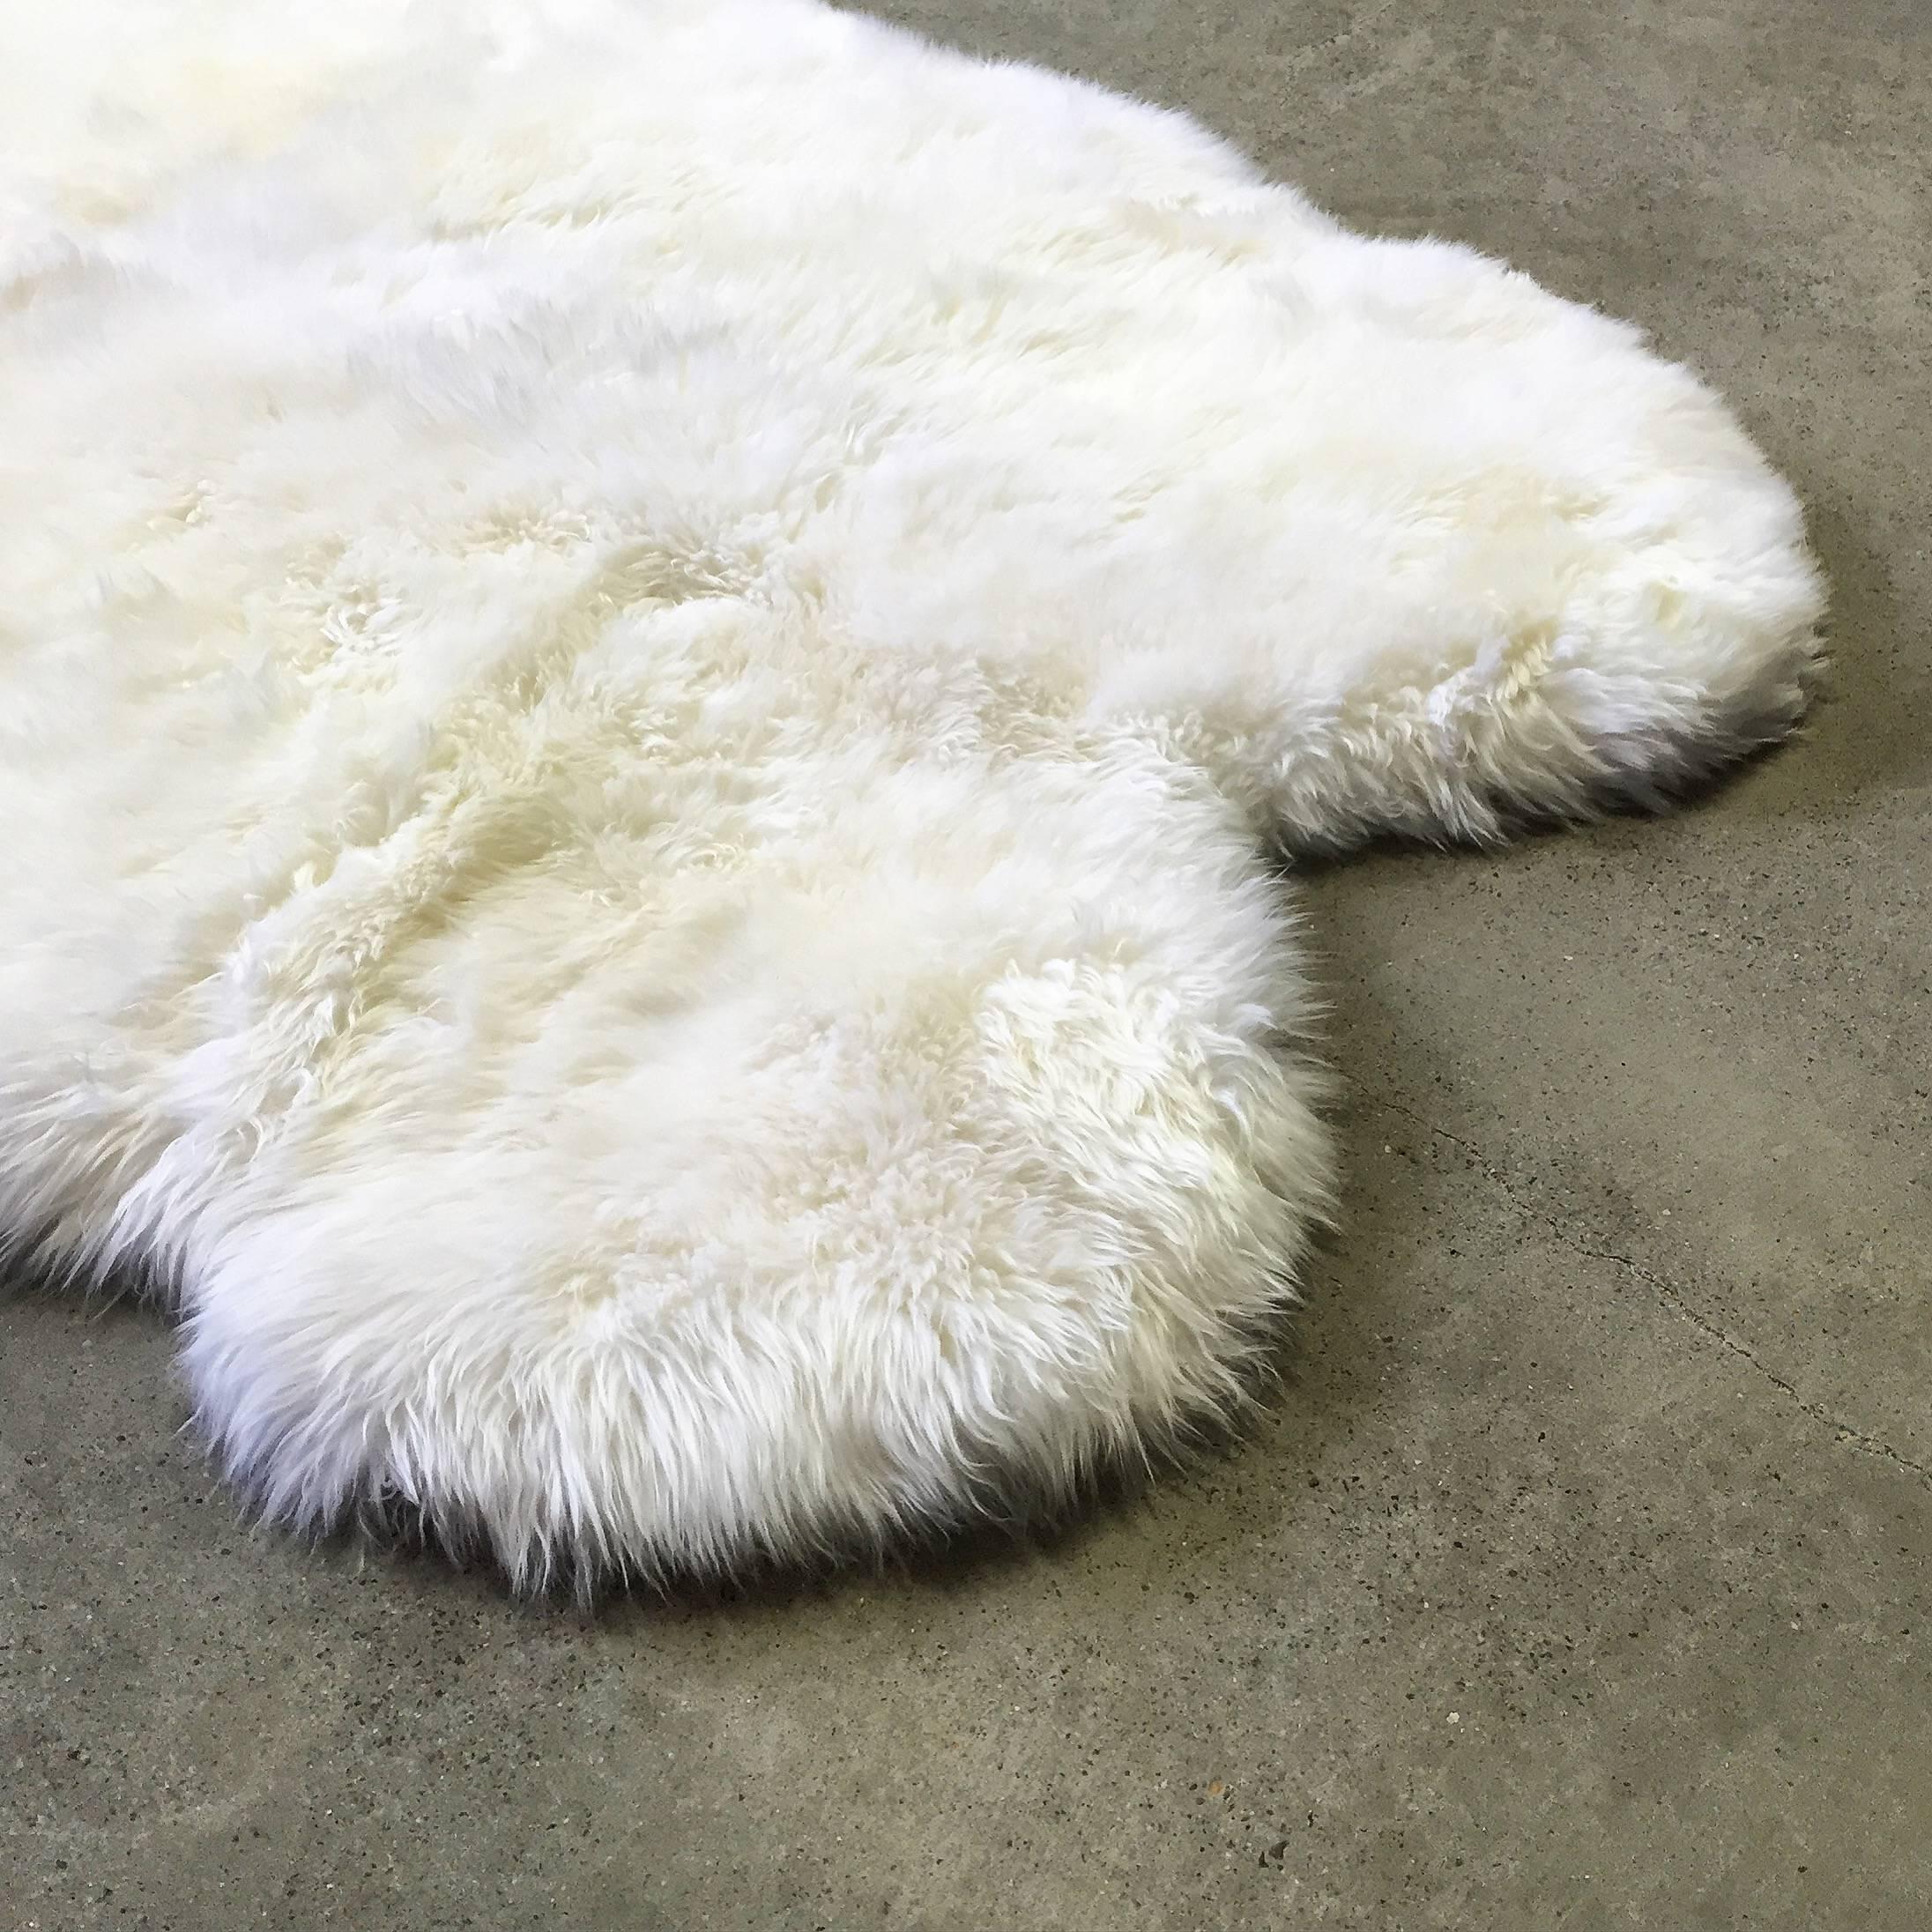 The naturalness and softness of a sheepskin rug can quickly elevate a room's beauty. The quad size is perfect as a cozy rug in any room of the house. We hand-select our beautiful rugs from the finest New Zealand sheepskin. Each rug meets our very